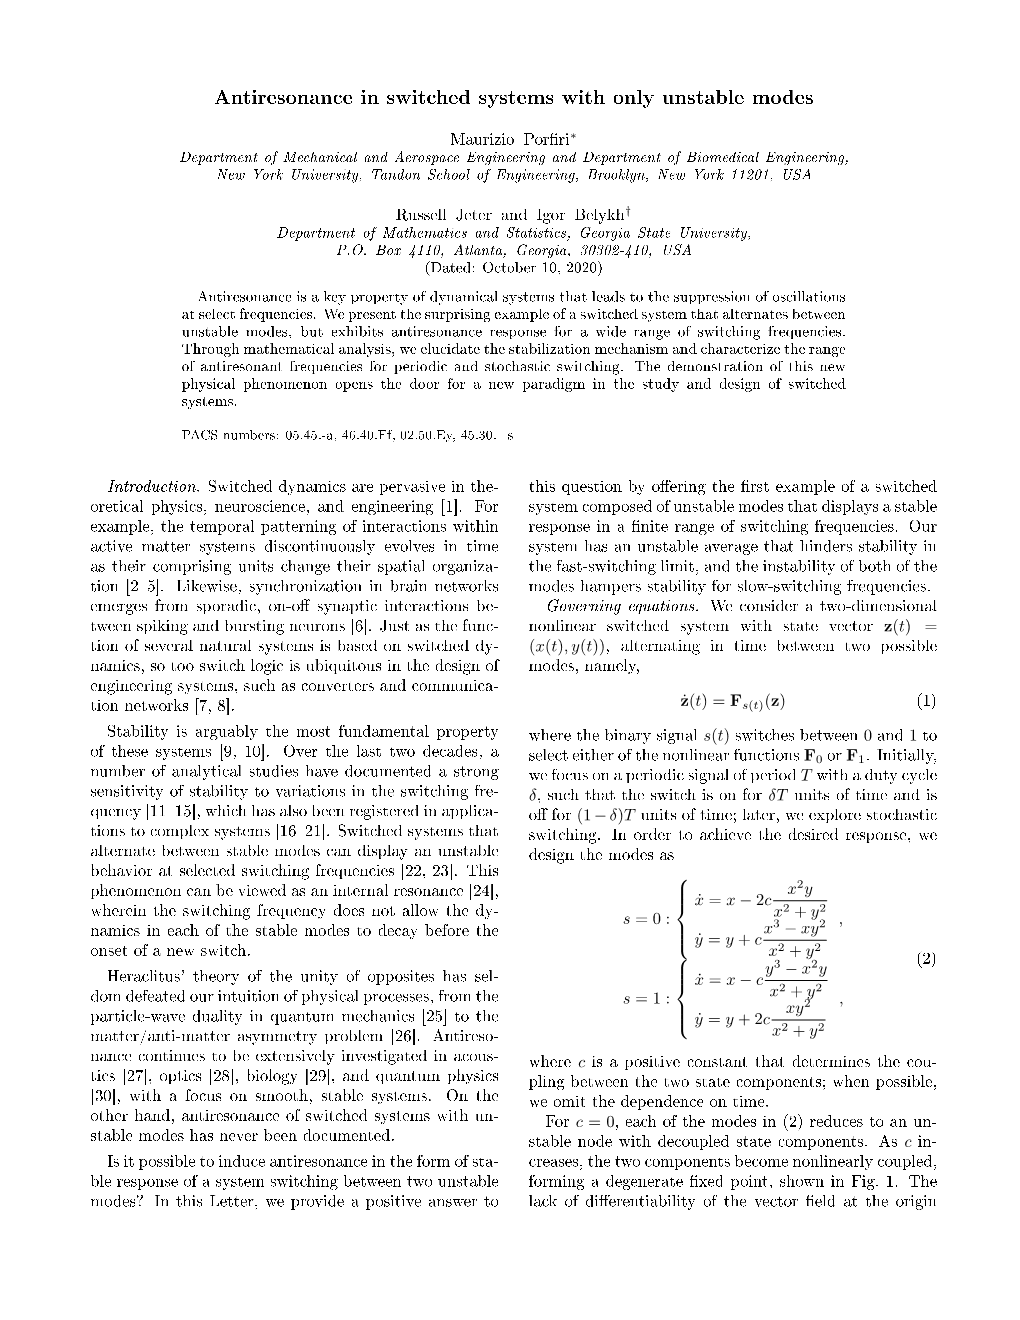 Antiresonance in Switched Systems with Only Unstable Modes